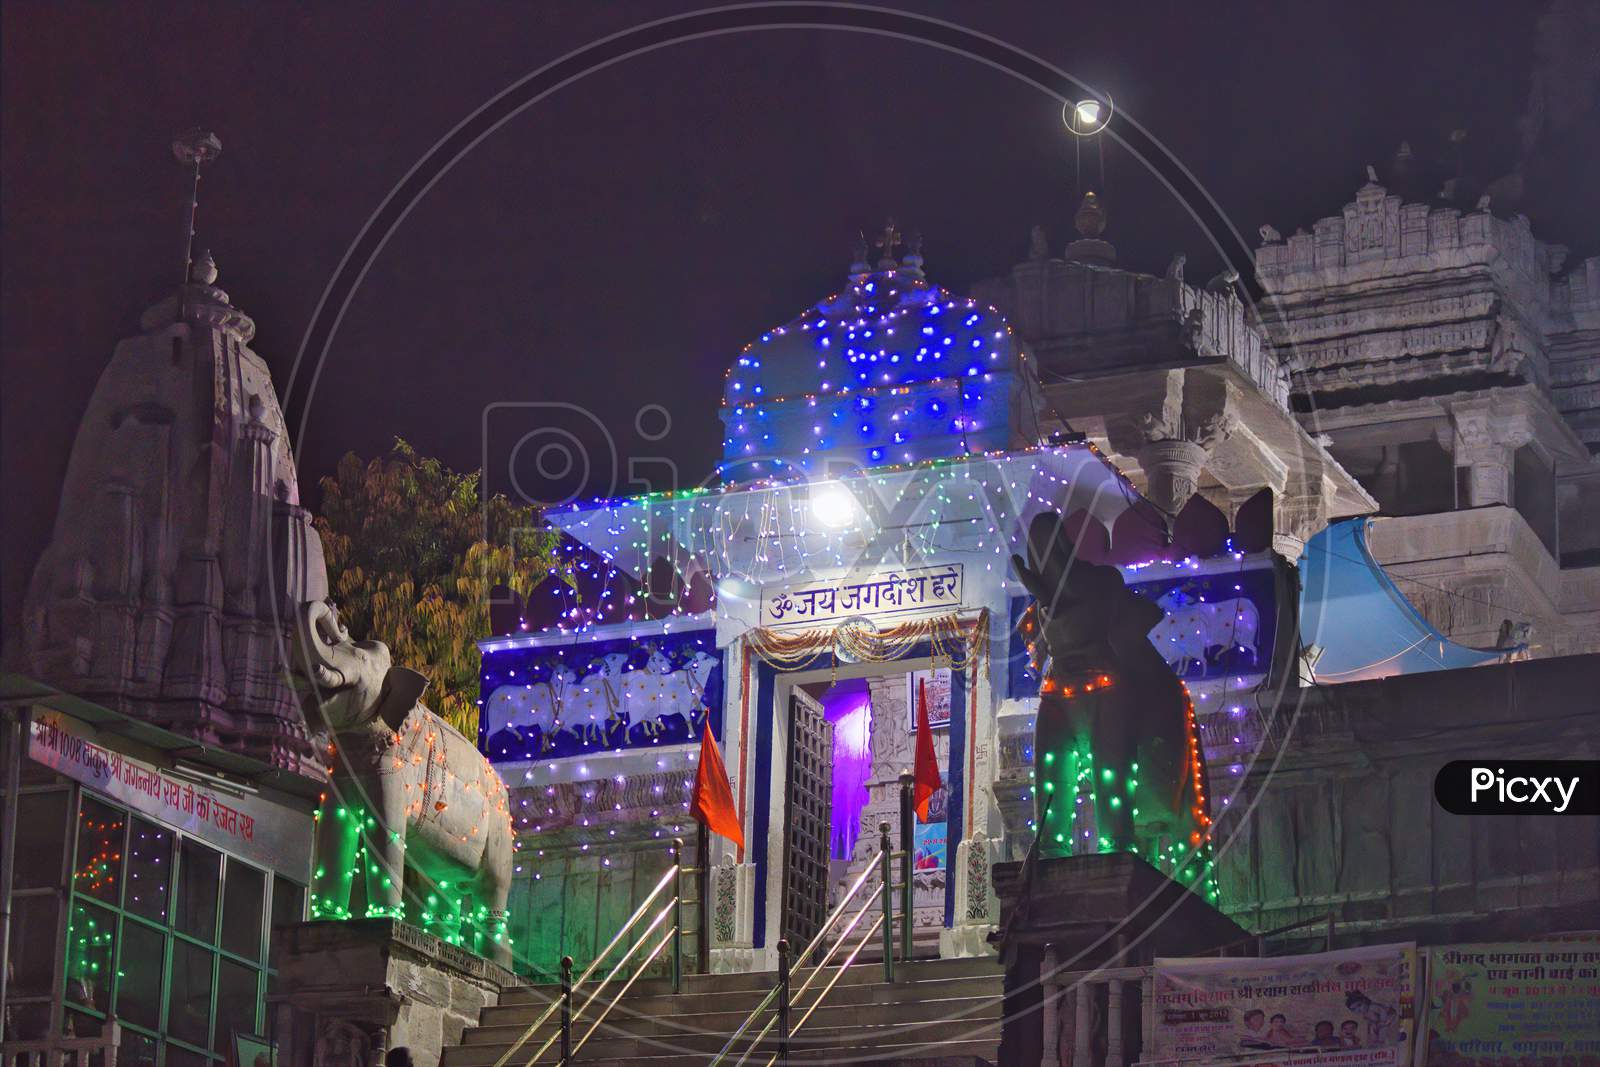 Udaipur, India - May 24, 2013: Night View Of Decorated Jagdish Hindu Temple Built In 1651